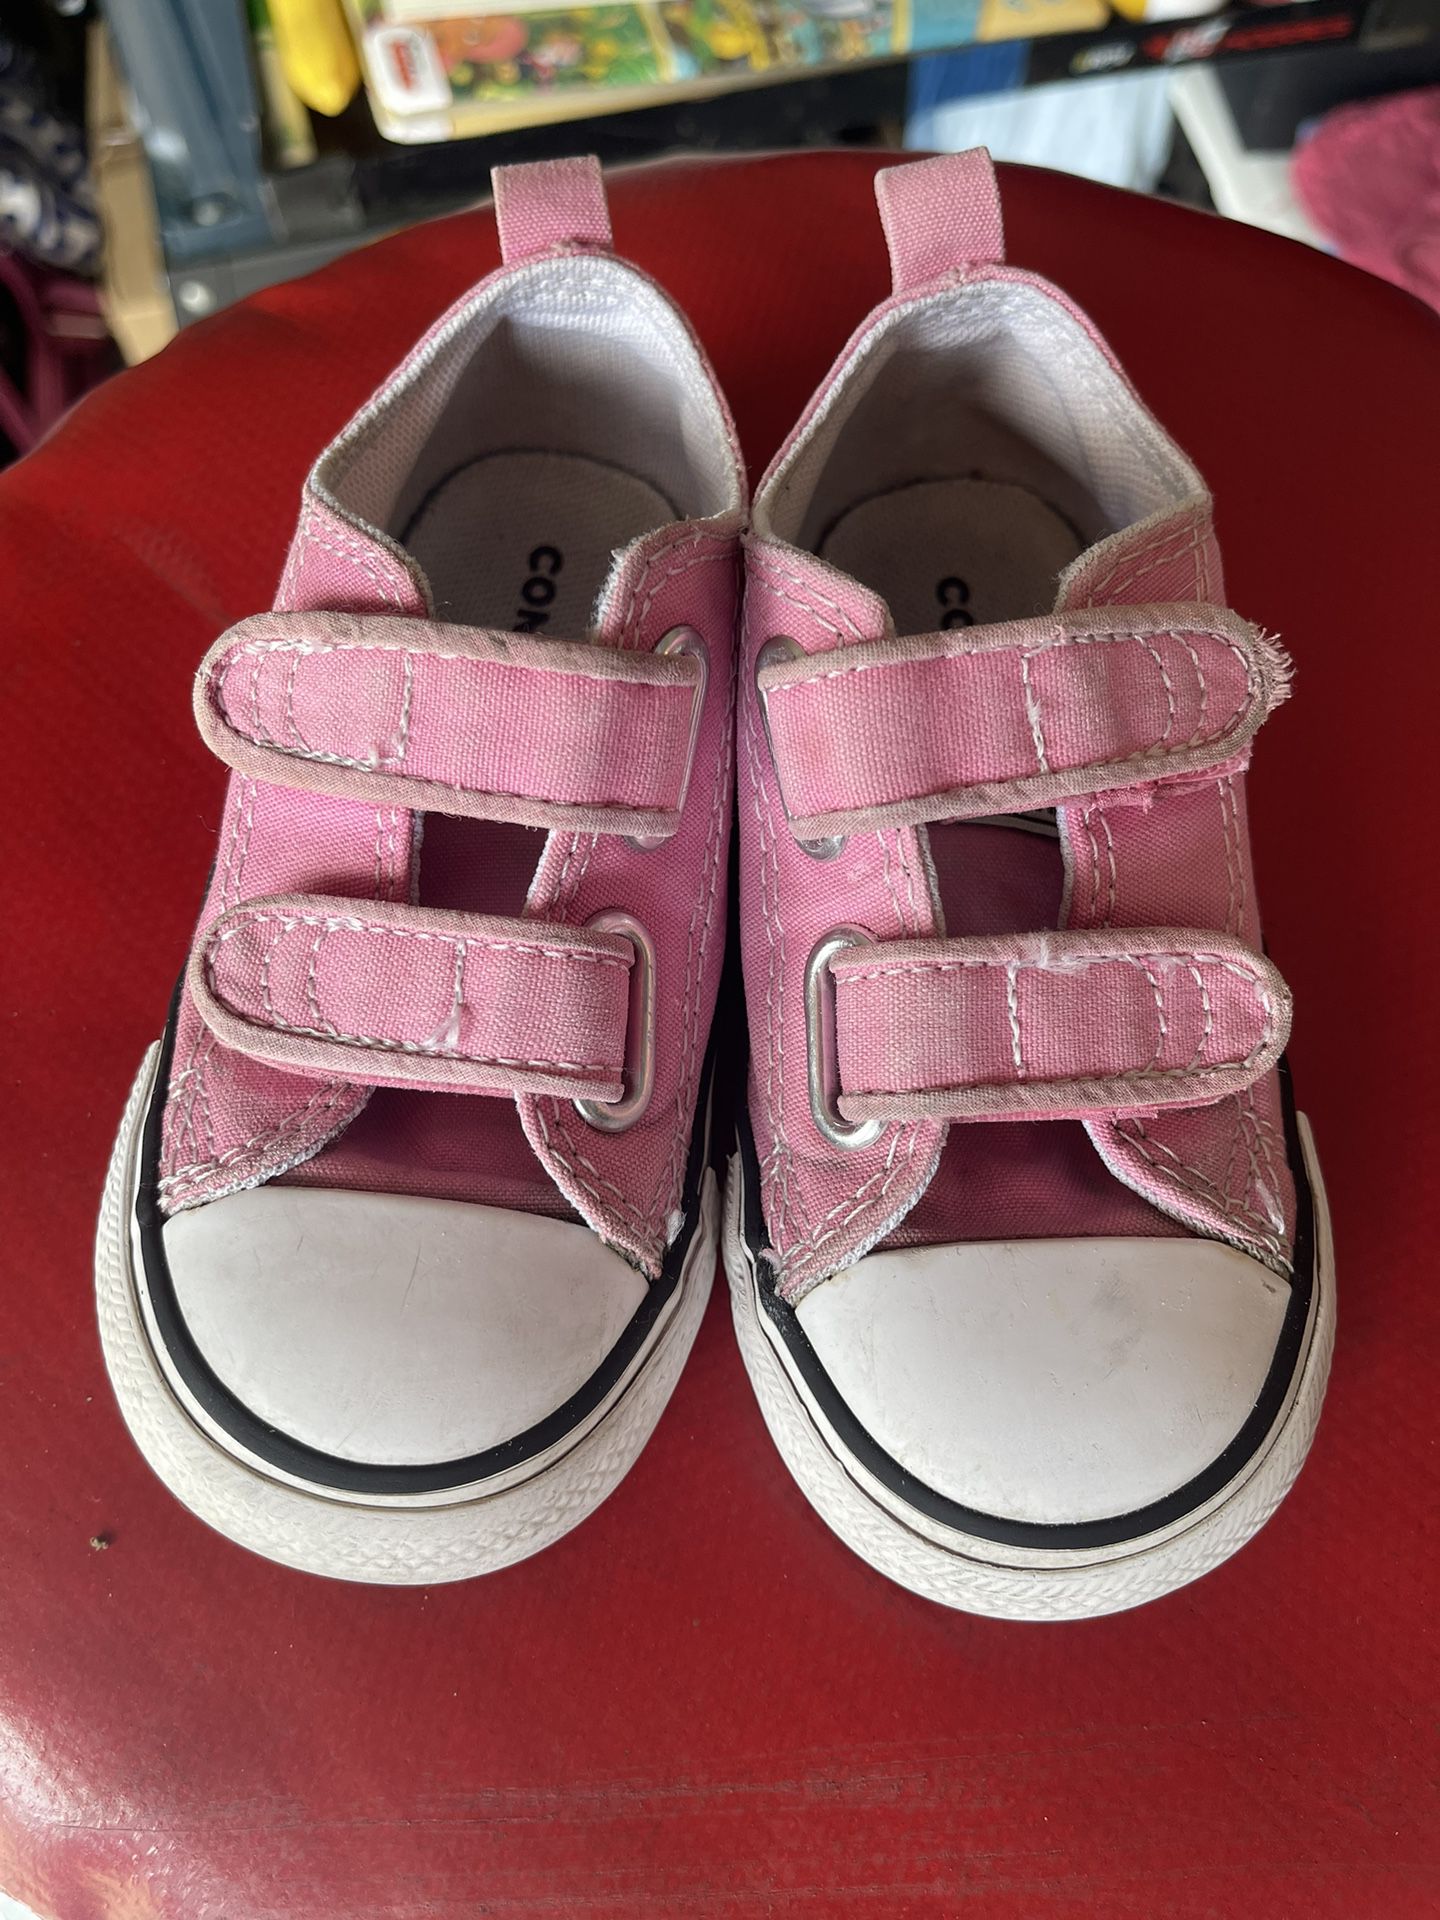 Toddler Converse All Star Chuck Taylor - size 7